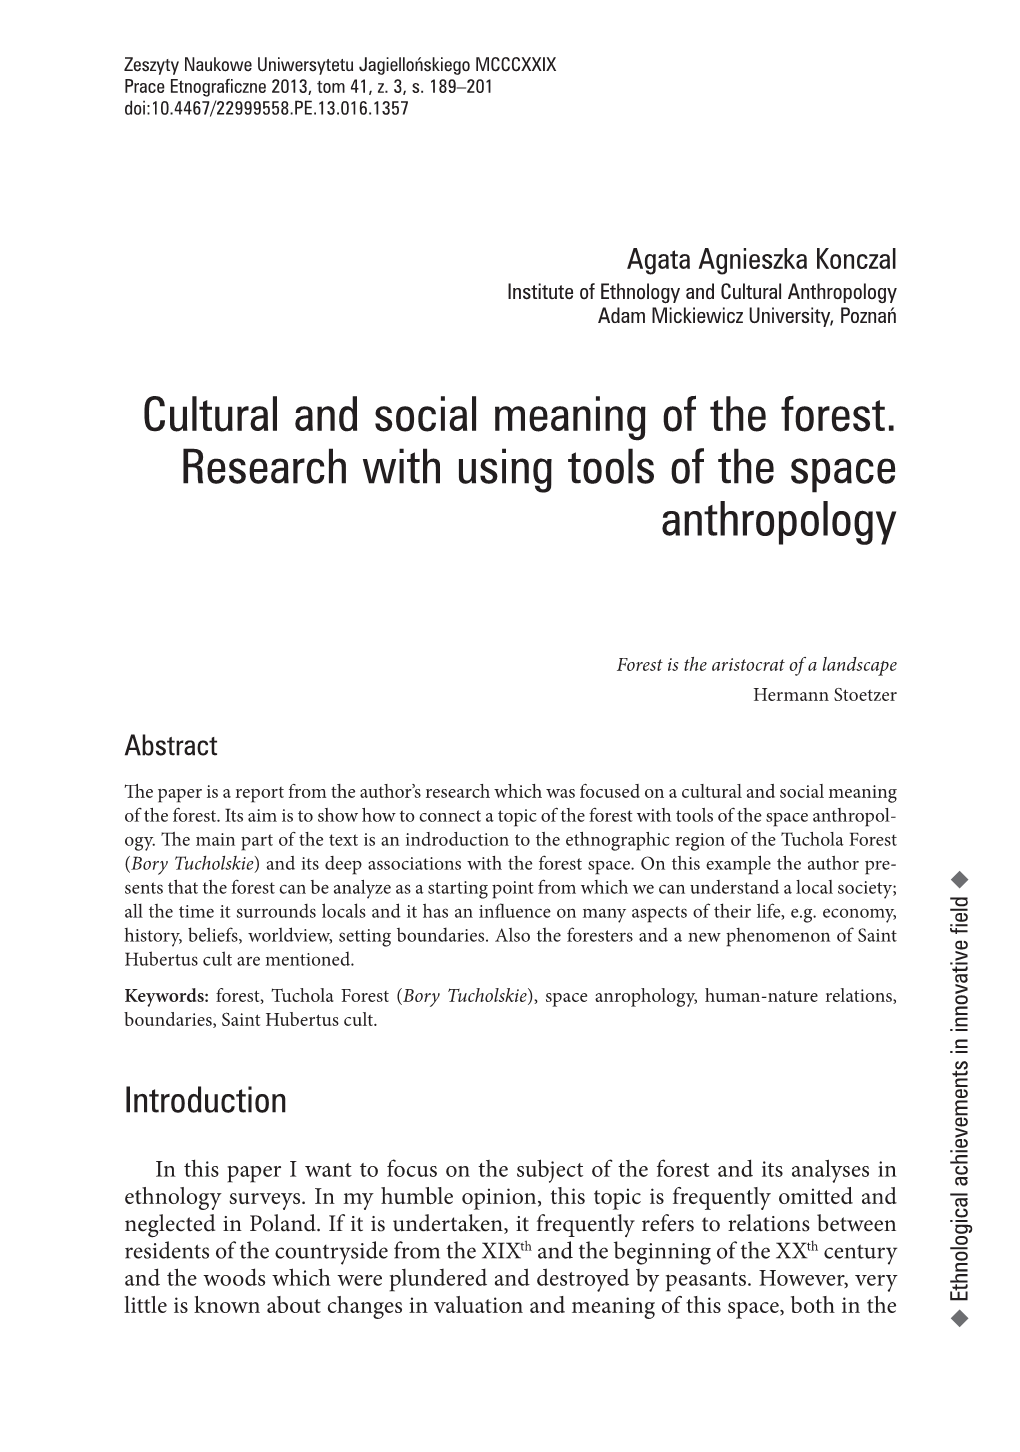 Cultural and Social Meaning of the Forest. Research with Using Tools of the Space Anthropology